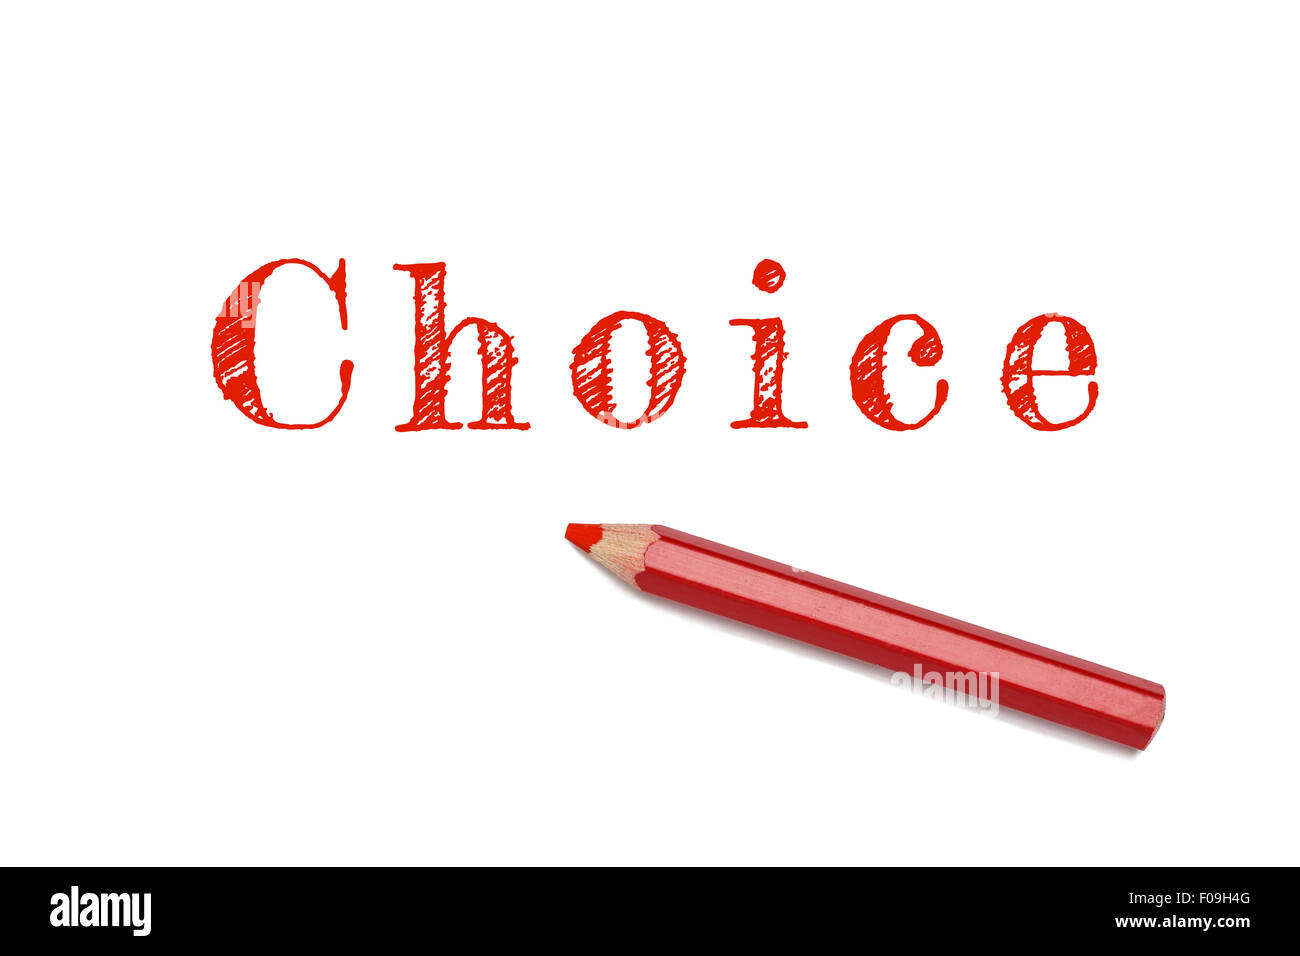 Choice text outline draw red pencil isolated on white background. Concept business, choice, decision, vision. Stock Photo